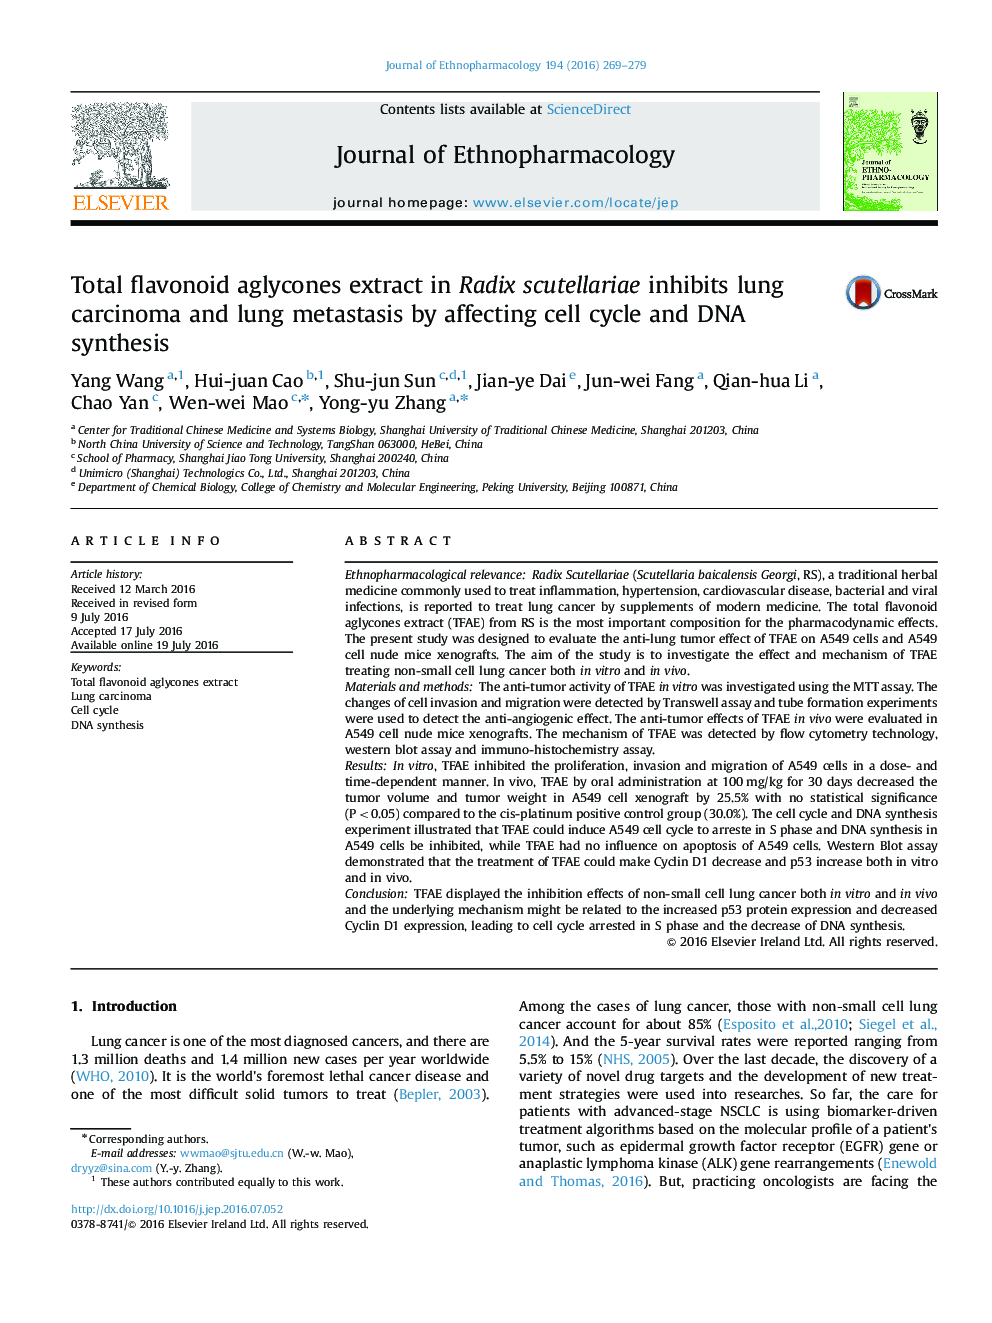 Total flavonoid aglycones extract in Radix scutellariae inhibits lung carcinoma and lung metastasis by affecting cell cycle and DNA synthesis